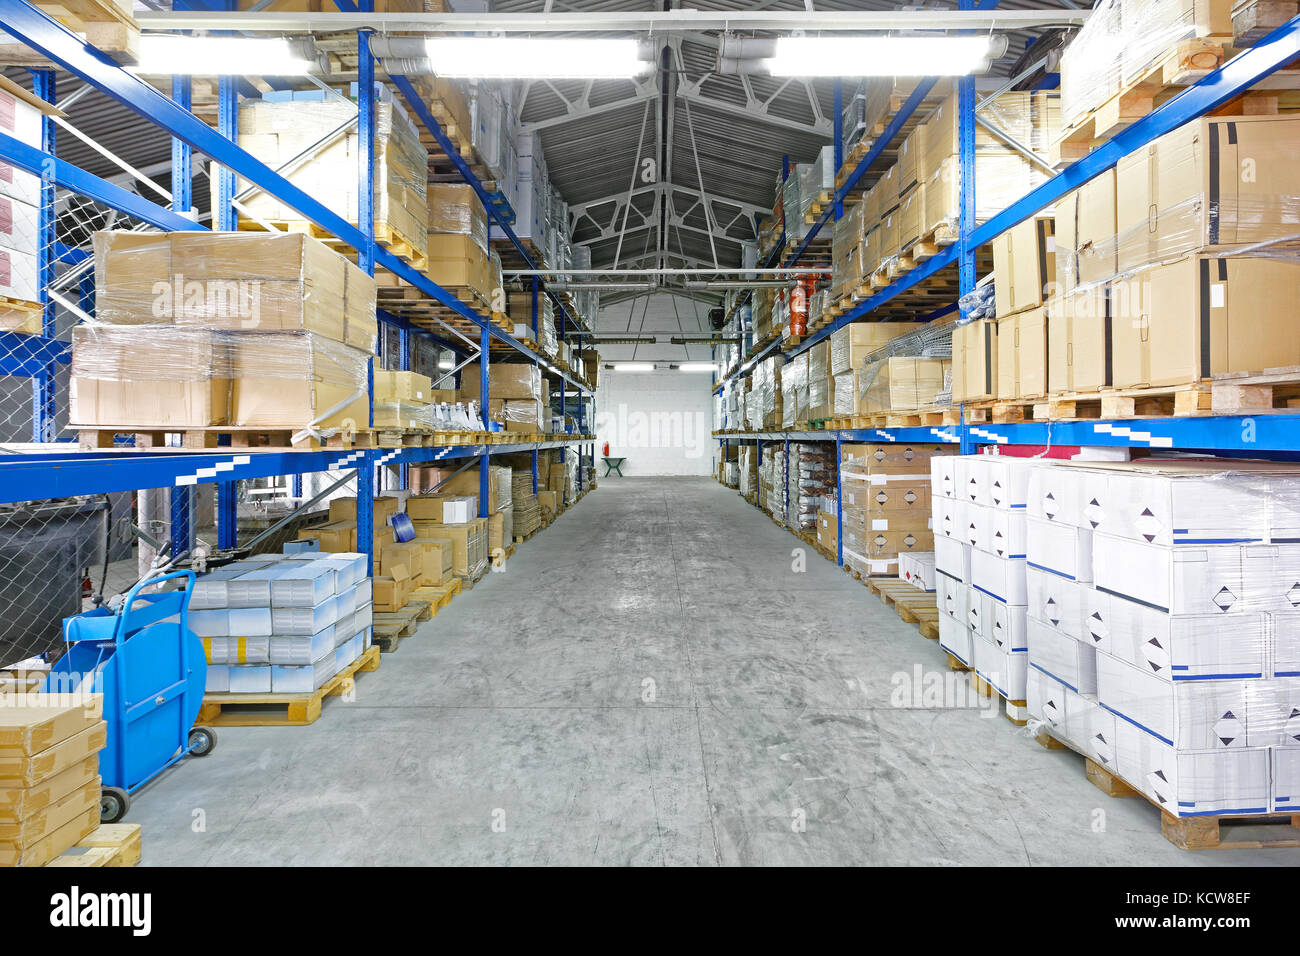 Row with Goods at Pallets in Distribution Warehouse Stock Photo